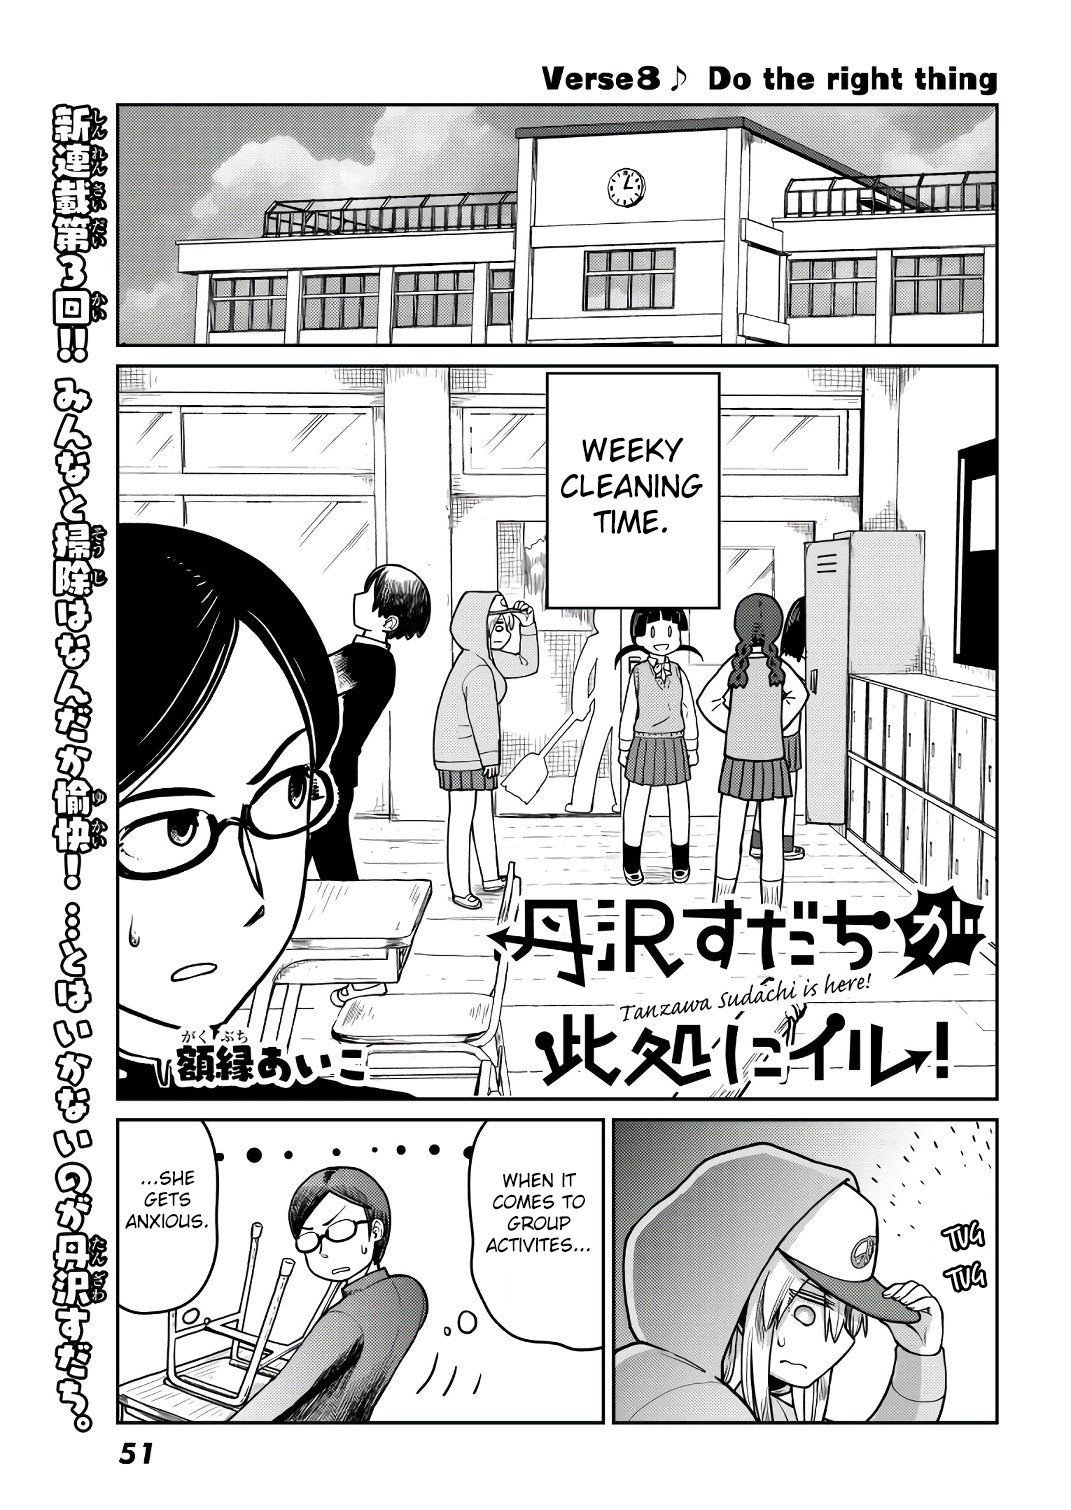 Tanzawa Sudachi Is Here! Vol.1 Chapter 8: Do The Right Thing - Picture 1